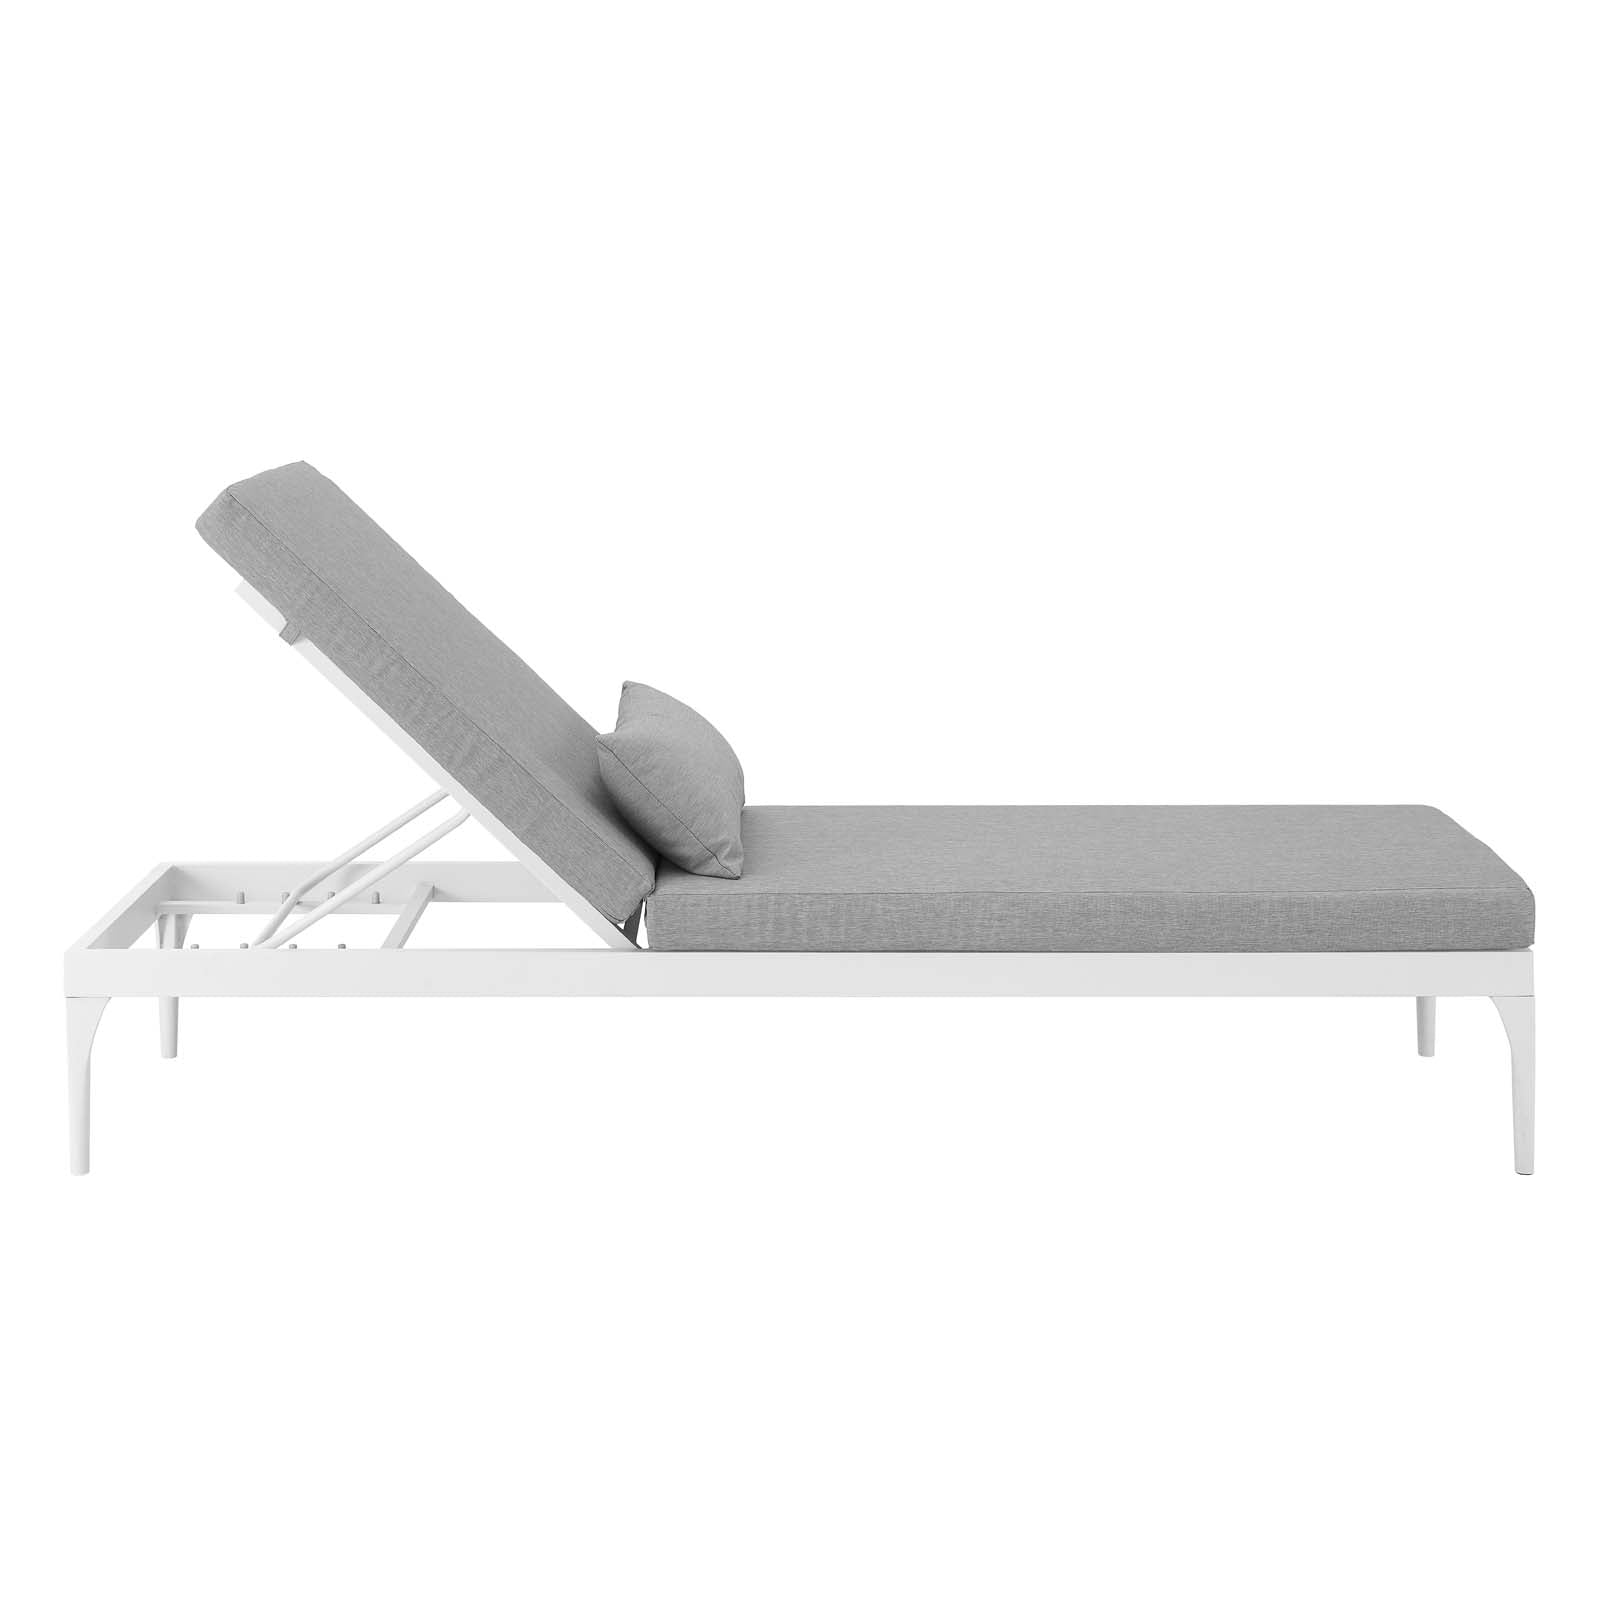 Modway Outdoor Loungers - Perspective Cushion Outdoor Patio Chaise Lounge Chair White Gray